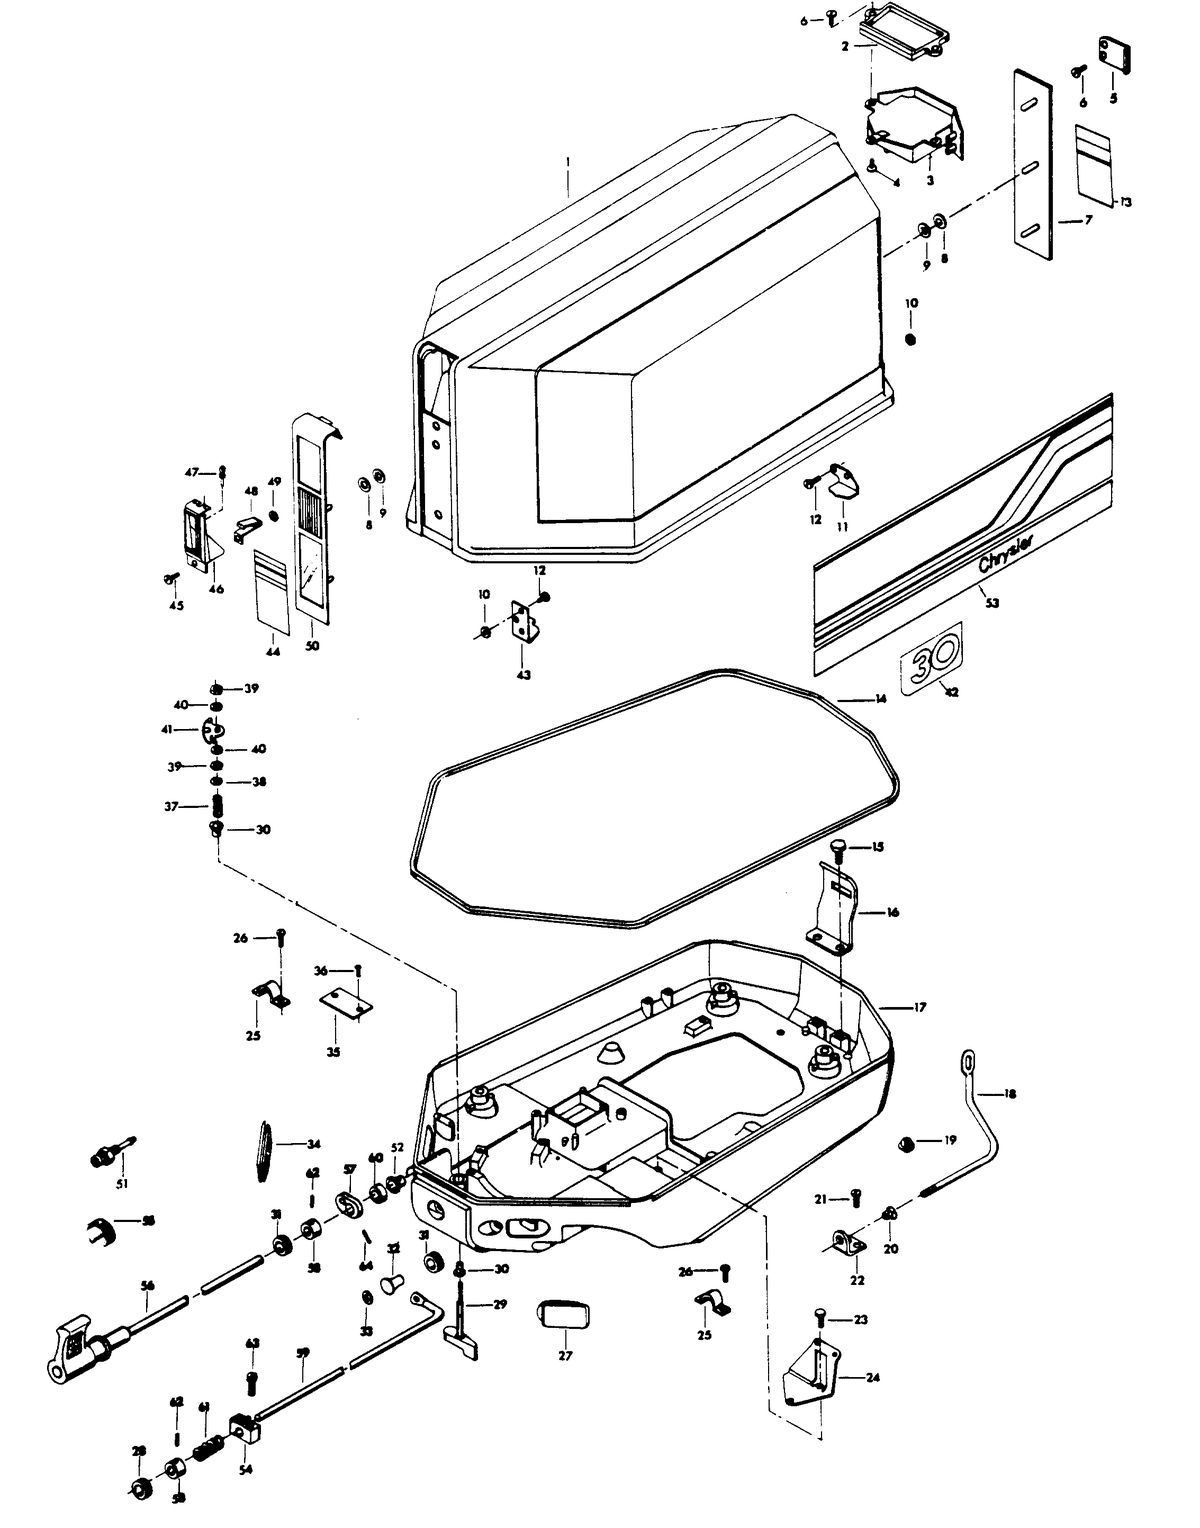 CHRYSLER 30 H.P. ENGINE COVER AND SUPPORT PLATE (MANUAL START MODELS)